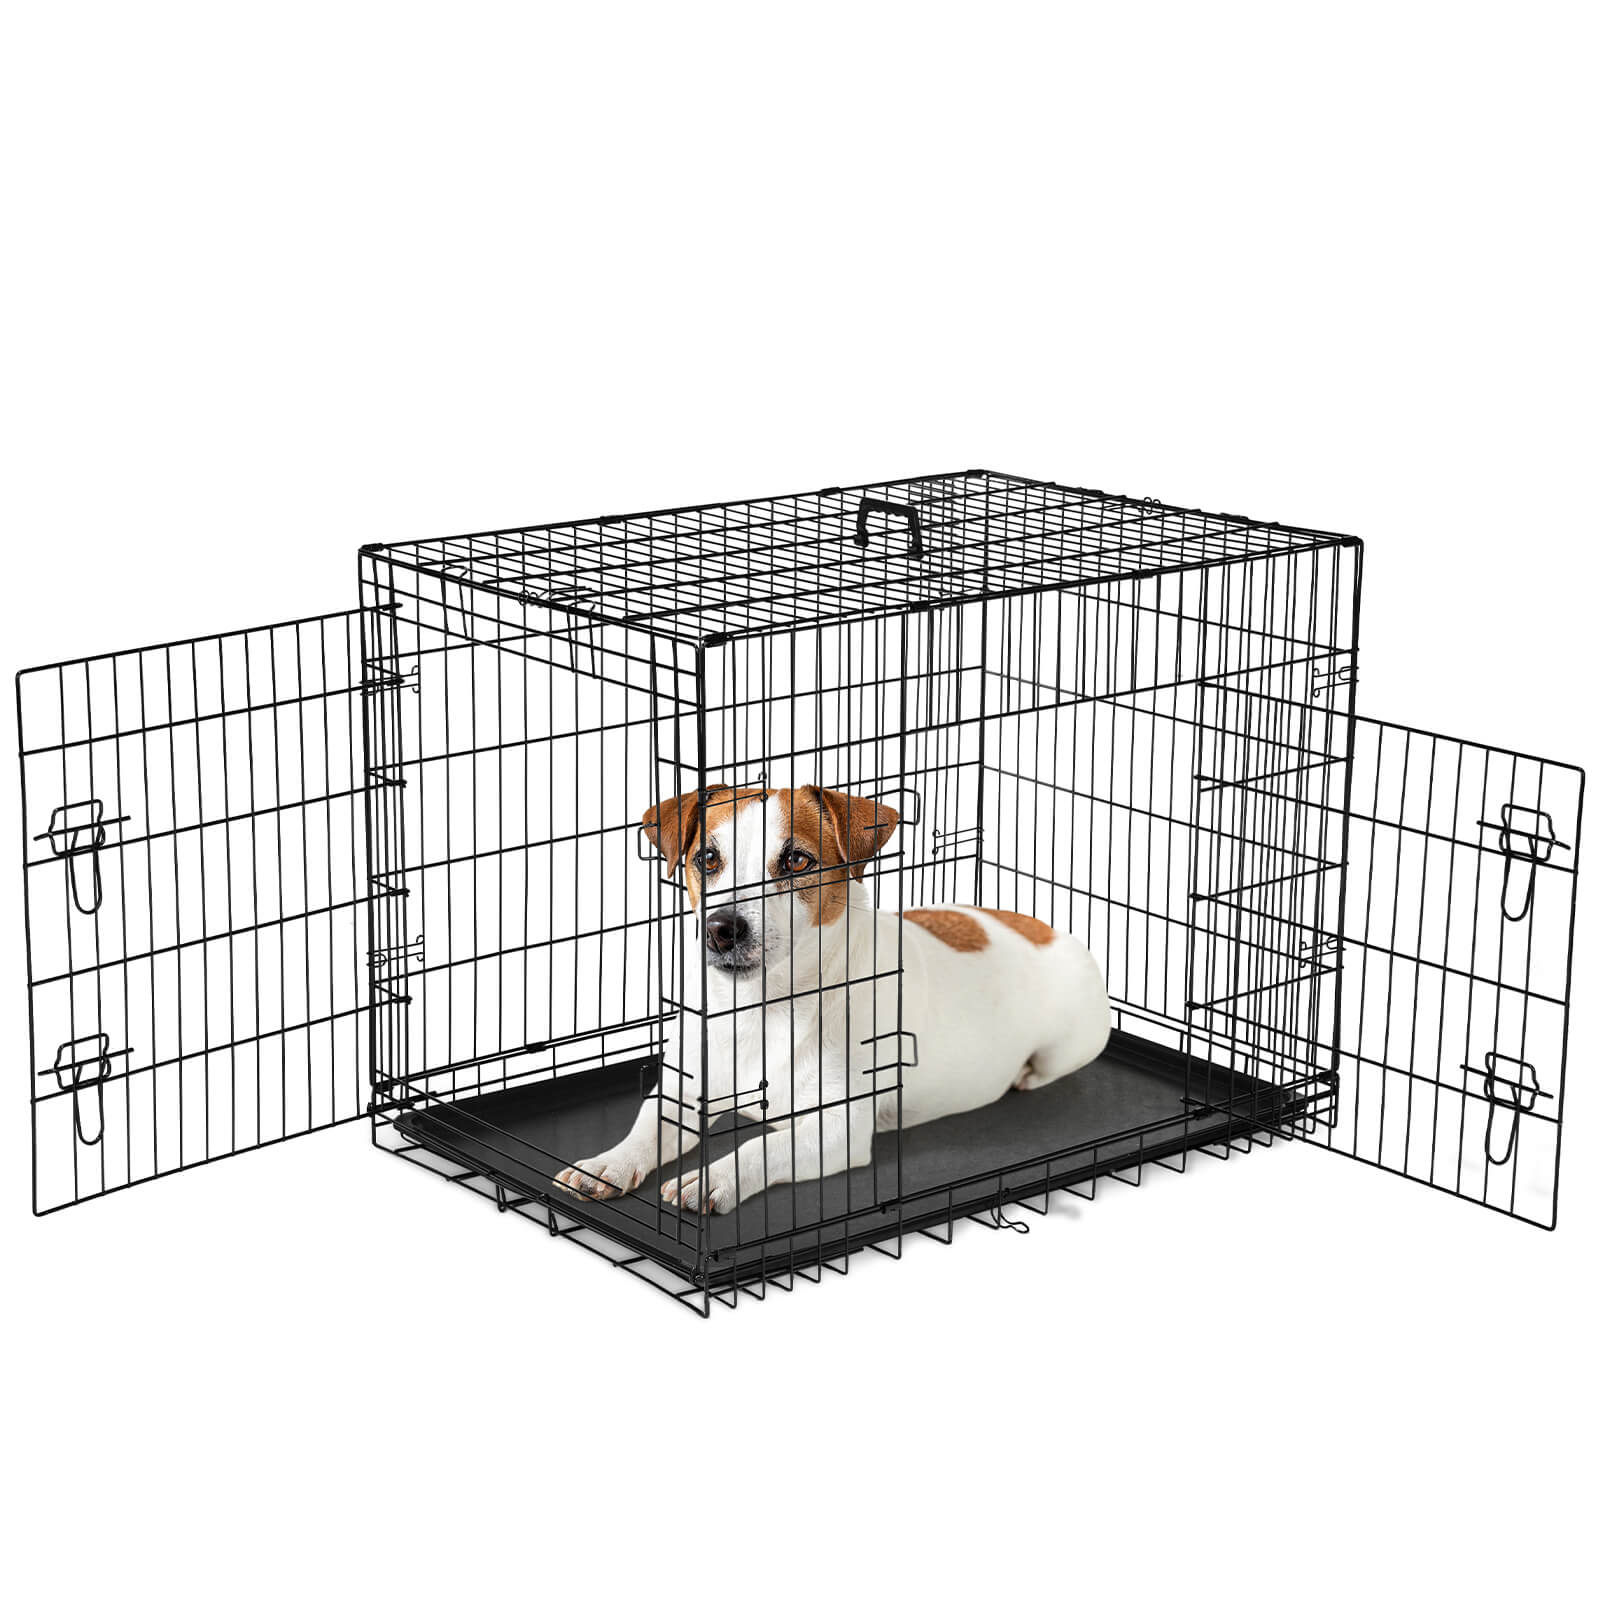 Dog Crate-24/30/36/42/48 inch, Double Door Dog Cage with Divider Panel and Plastic Leak-Proof Pan Tray, foldable, easy to carry, suitable for indoor, outdoor, travel use.